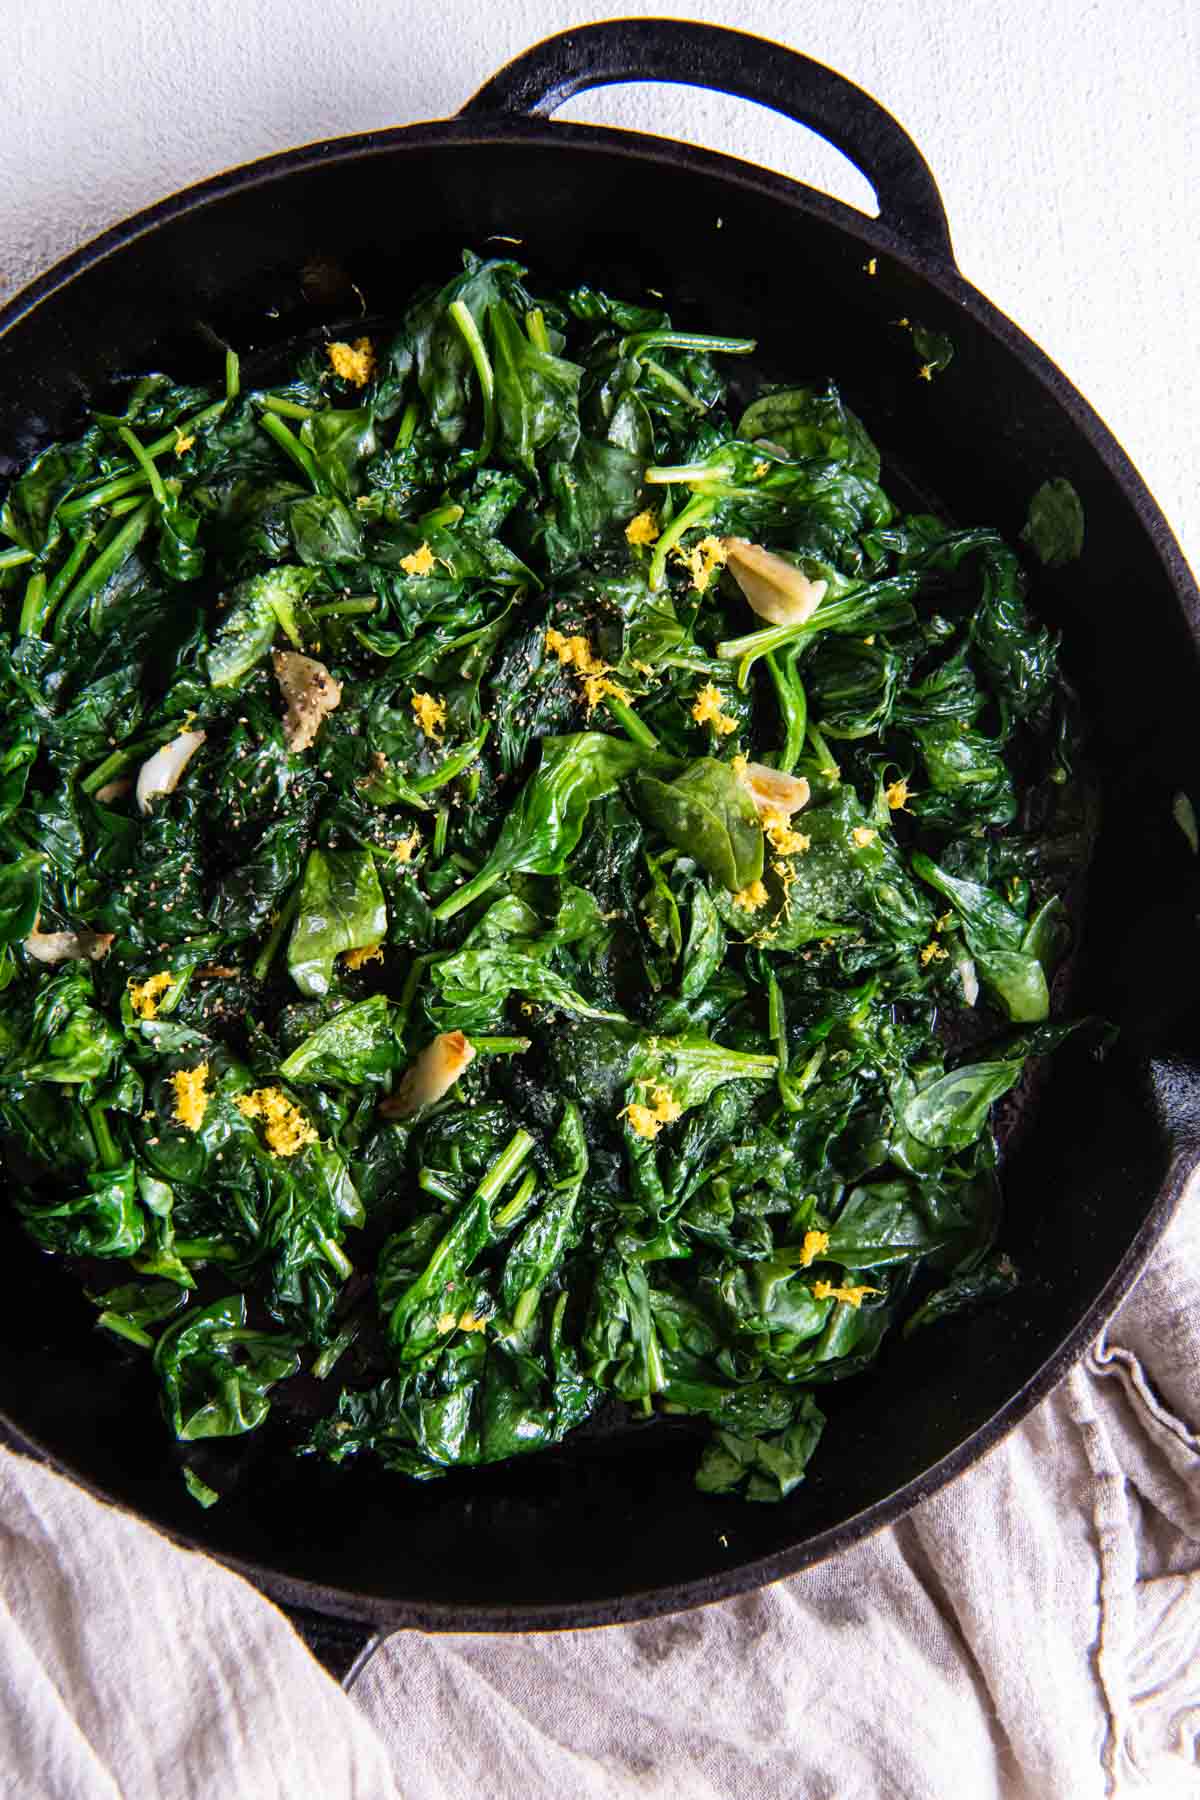 Sautéed spinach with garlic and lemon zest in a cast iron skillet.